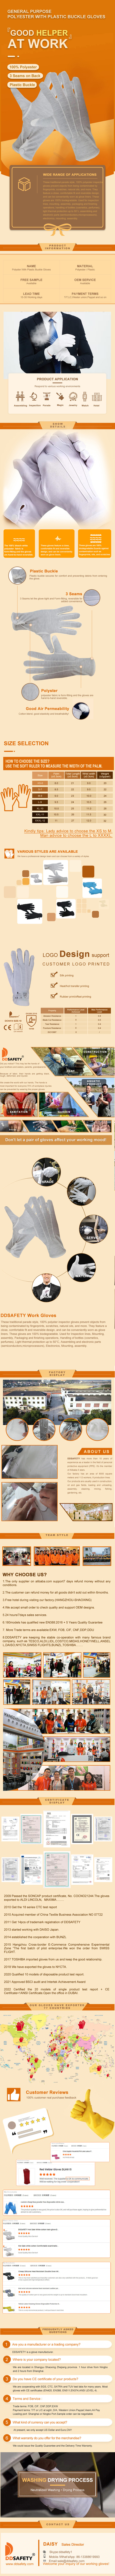 White Polyester Gloves, 3 Seams on Back, with a Plastic Buckle - DCH414 White Polyester Gloves, 3 Seams on Back, with a Plastic Buckle - DCH414 gloves,Polyester Gloves,White Polyester Gloves